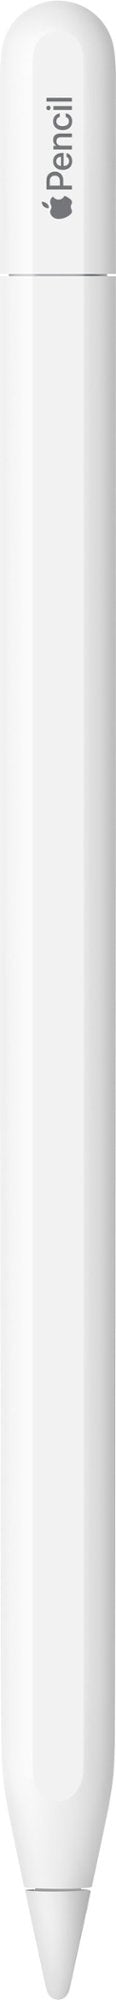 Apple Pencil (USB-C) - White (Pre-Owned)